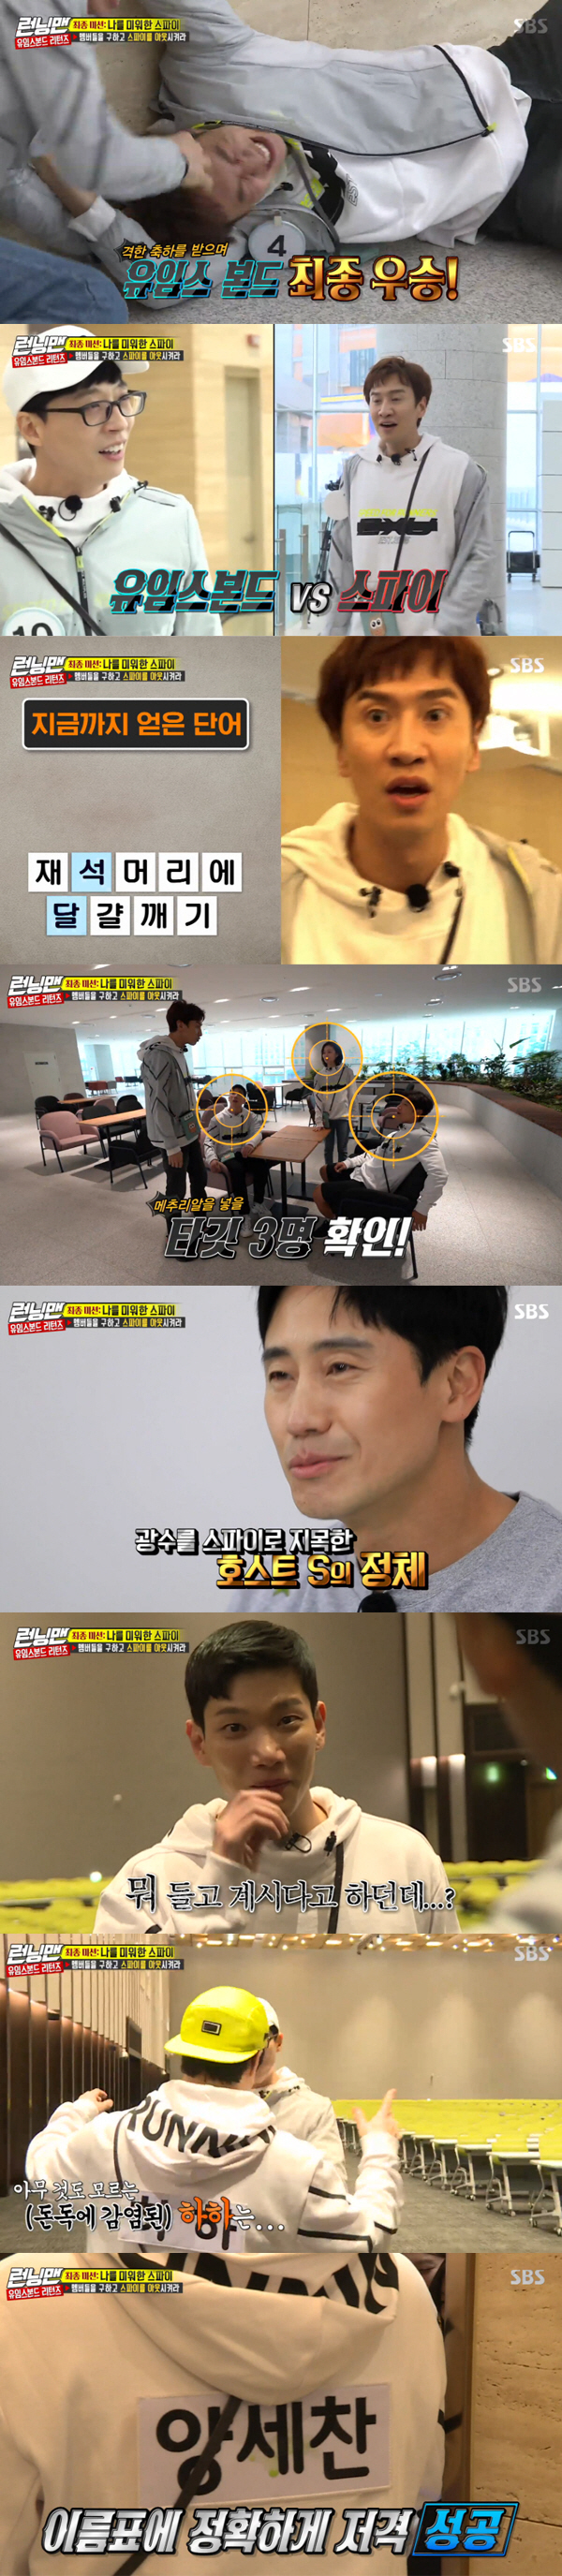 Running Man was also a Yumes Bond.Shin Ha-kyun, Esom and Kim Kyung-nam appeared as guests on SBS Running Man broadcast on the 28th, and 100 million secret room game race was held.The production team introduced the new race, which is divided into 1/N after saving 100 million won for nine hours. If you dont spend a penny for nine hours, you will get 10 million won per person.However, it is prohibited to possess personal items. You can purchase the necessary items by interphone in the container.Lee Kwang-soo smiled brightly at the words that the individual spending amount was all private.The door was opened every hour, and the members started to consume storms such as jjajangmyeon, cup noodles, rice, quilts, chairs, and deodorants.The members were surprised at the amount of the decrease, and the members were surprised at Lee Kwang-soos room, which was covered with blankets, unlike the somewhat small Jeon So-mins room.Meanwhile, Yoo Jae-Suk identified a questionable note earlier handed over by Esom, where he said: You are a Yumes Bond, there is a Spy aiming for you.Im Bond Girl, it said.Earlier, the crew told Esom that Yoo Jae-Suk was a Yumes Bond secretly Spy and explained that you could have Spy in-N-Out Burger before Yoo Jae-Suk In-N-Out Burger.Baro Yoo Jae-Suk bought water guns and molten medicine for the Yumes Bond activity.The nine-hour solitary life ended, and the members won a quarter of the final prize money balance.In particular, the members will find the safe with their name attached to the last mission and then find the safe of the host S to acquire the amount collected.Yoo Jae-Suk and Esom were given secret orders by the crew; the members are infected by the Dondog the moment they open the safe.However, Yoo Jae-Suk can be treated by shooting a water gun vaccine on the name tag of a member who has been in Dondog.However, even one person is infected in Dondog, and the race ends when In-N-Out Burger or By Spy, Uims Bond is in-N-Out Burger.Yang Se-chan, Lee Kwang-soo, Ji Seok-jin, and Song Ji-hyo found the safe, so Yoo Jae-Suk vaccinated their name tags, and the members headed to the intensive care unit.Members in the intensive care unit found quail eggs in their hats, and Spys identity was later identified as Lee Kwang-soo.The identity of host S, who identified Lee Kwang-soo as Spy, was Shin Ha-kyun.Shin Ha-kyun suggested that the Kwangsu should create a chance for Park Jae-seok to avenge his brother.Lee Kwang-soo left the treatment room and put quail eggs in the members secretly to get clues to remove Yoo Jae-Suk.Lee Kwang-soo, who later got the hint of breaking eggs in Park Jae-seoks head, went out looking for Baro Yoo Jae-Suk; the two finally facing each other.Yoo Jae-Suk was embarrassed to see Lee Kwang-soo, who had gone to the treatment room earlier, and won the championship by shooting a water gun in the face of Baro Lee Kwang-soo.Shin Ha-kyun, who finally appeared as him, presented the winning Yoo Jae-Suk and Esom with an honorary pure gold card.Lee Kwang-soo, who failed the Spy mission on the other hand, was hit by Shin Ha-kyun for a penalty.